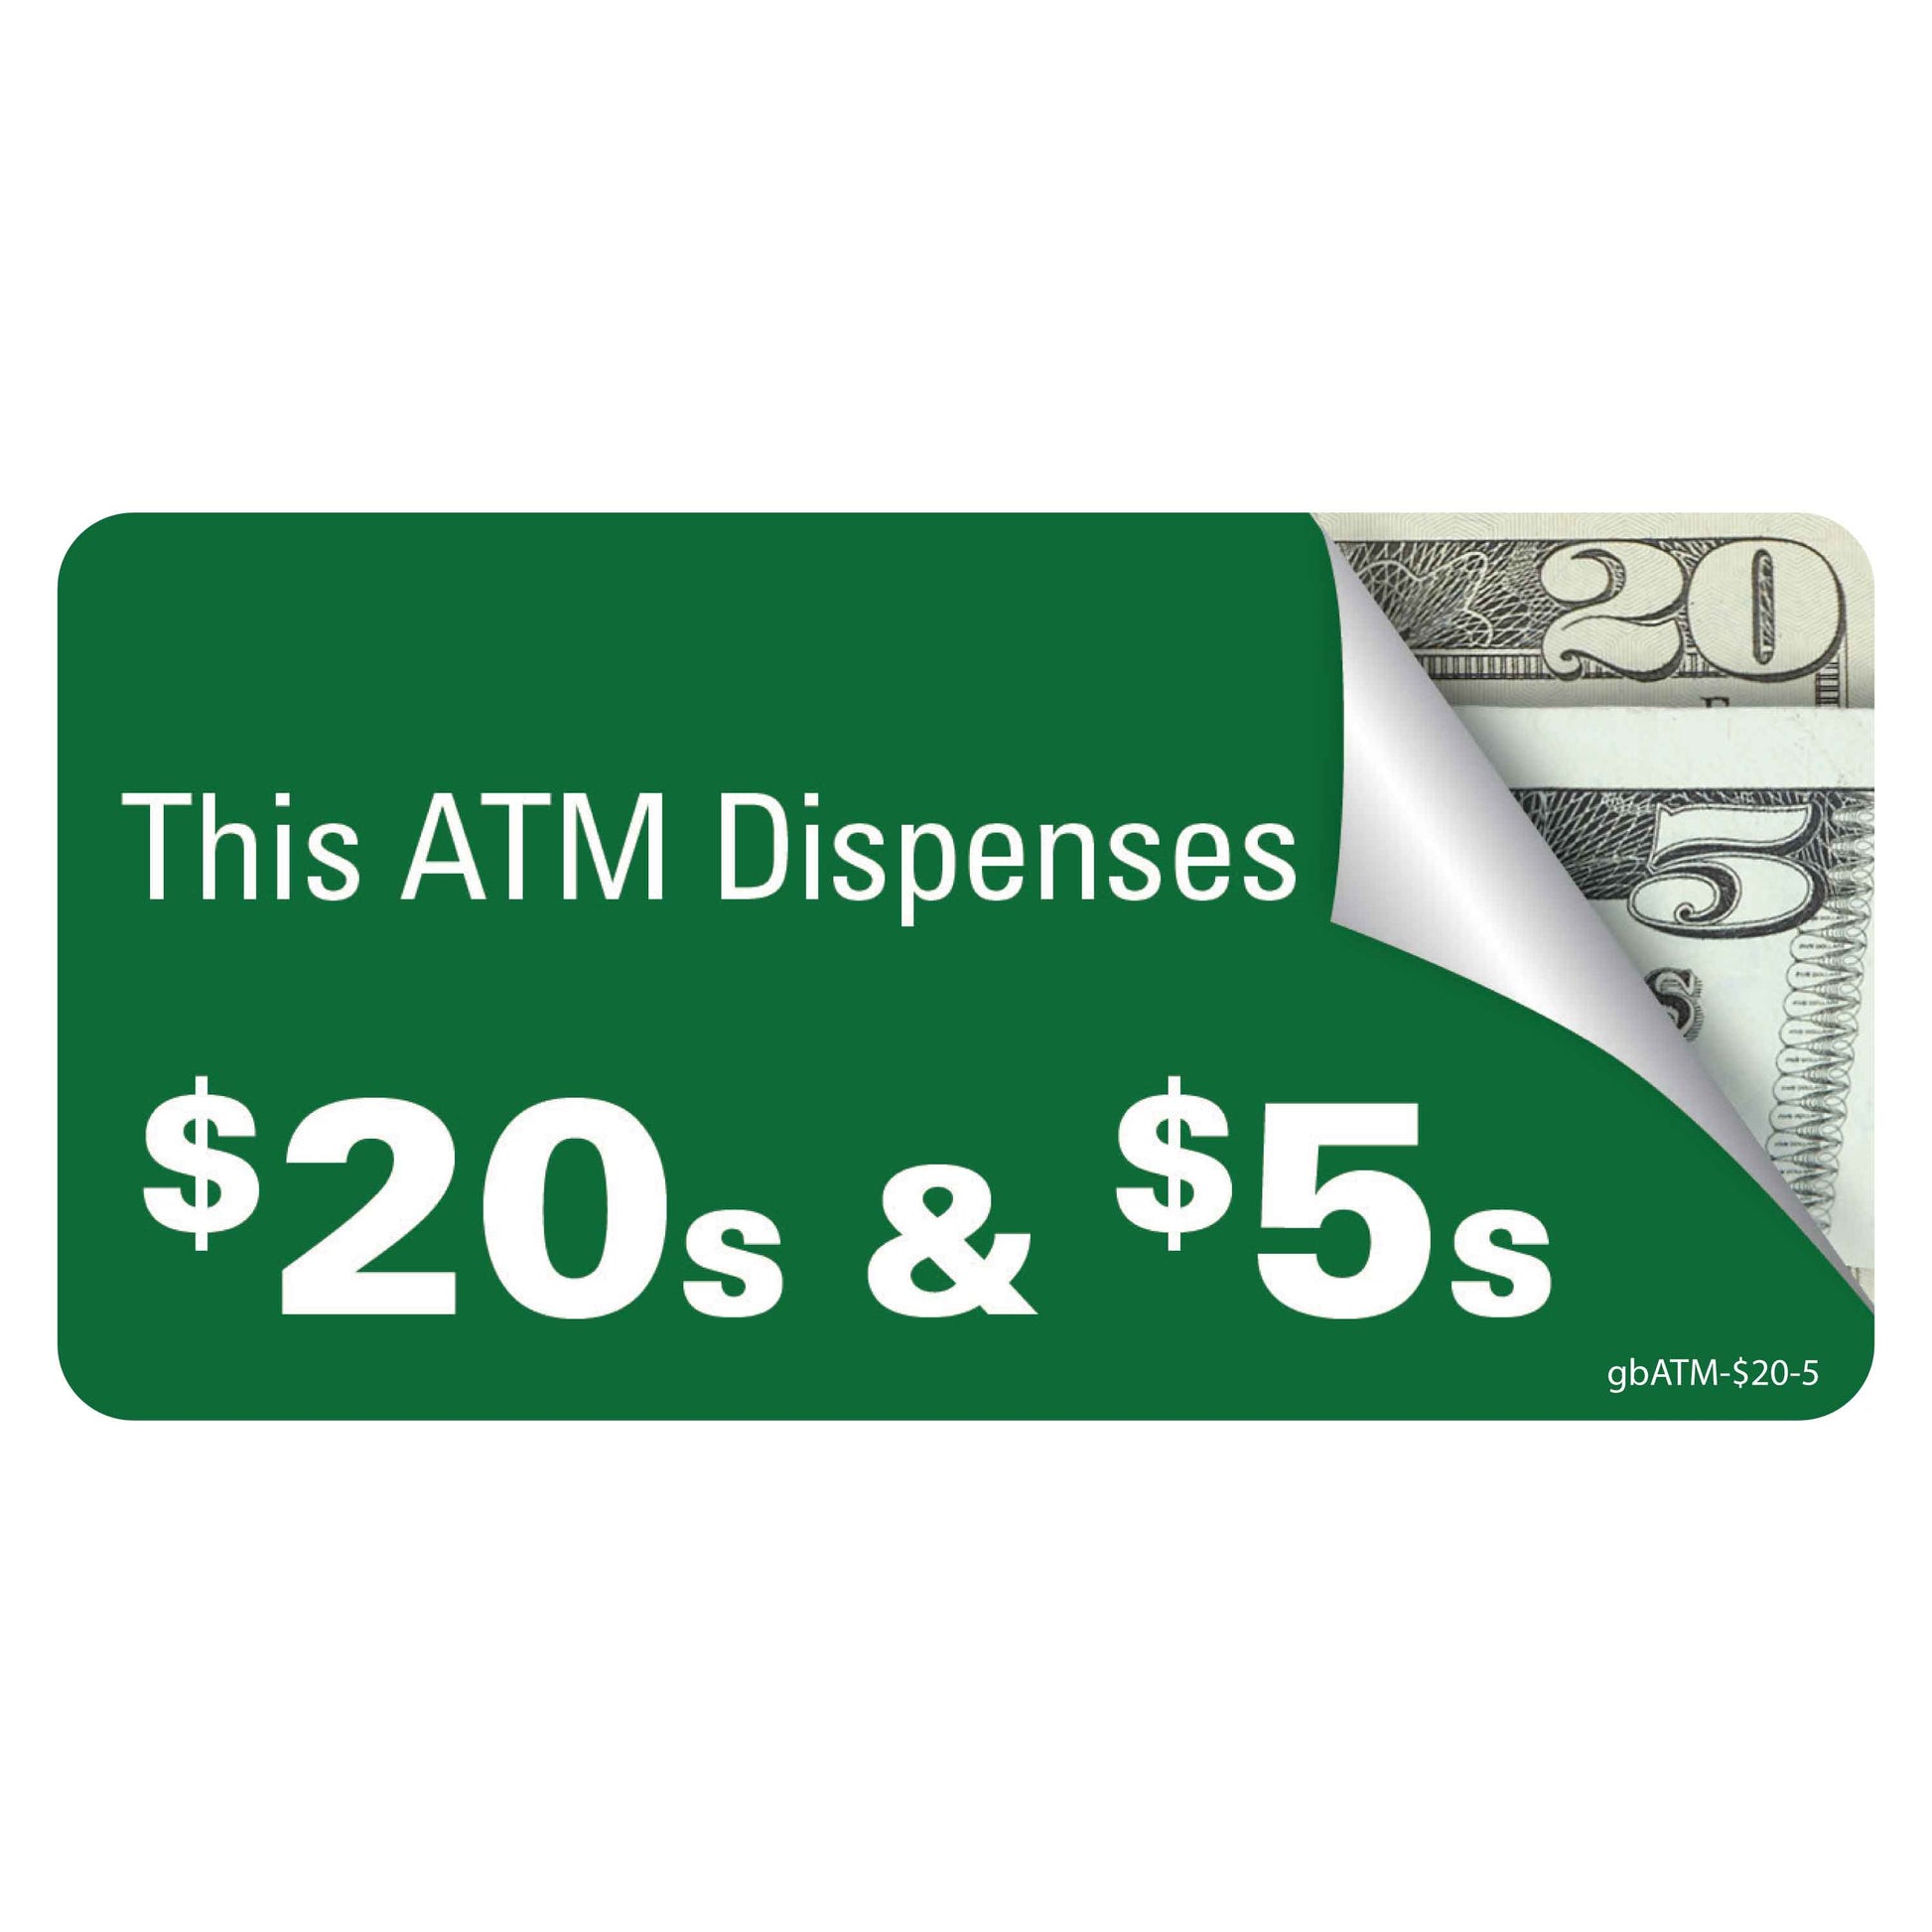 Pro ATM Dispense $20's & $5's Decal. 4 inches by 2 inches in size. 